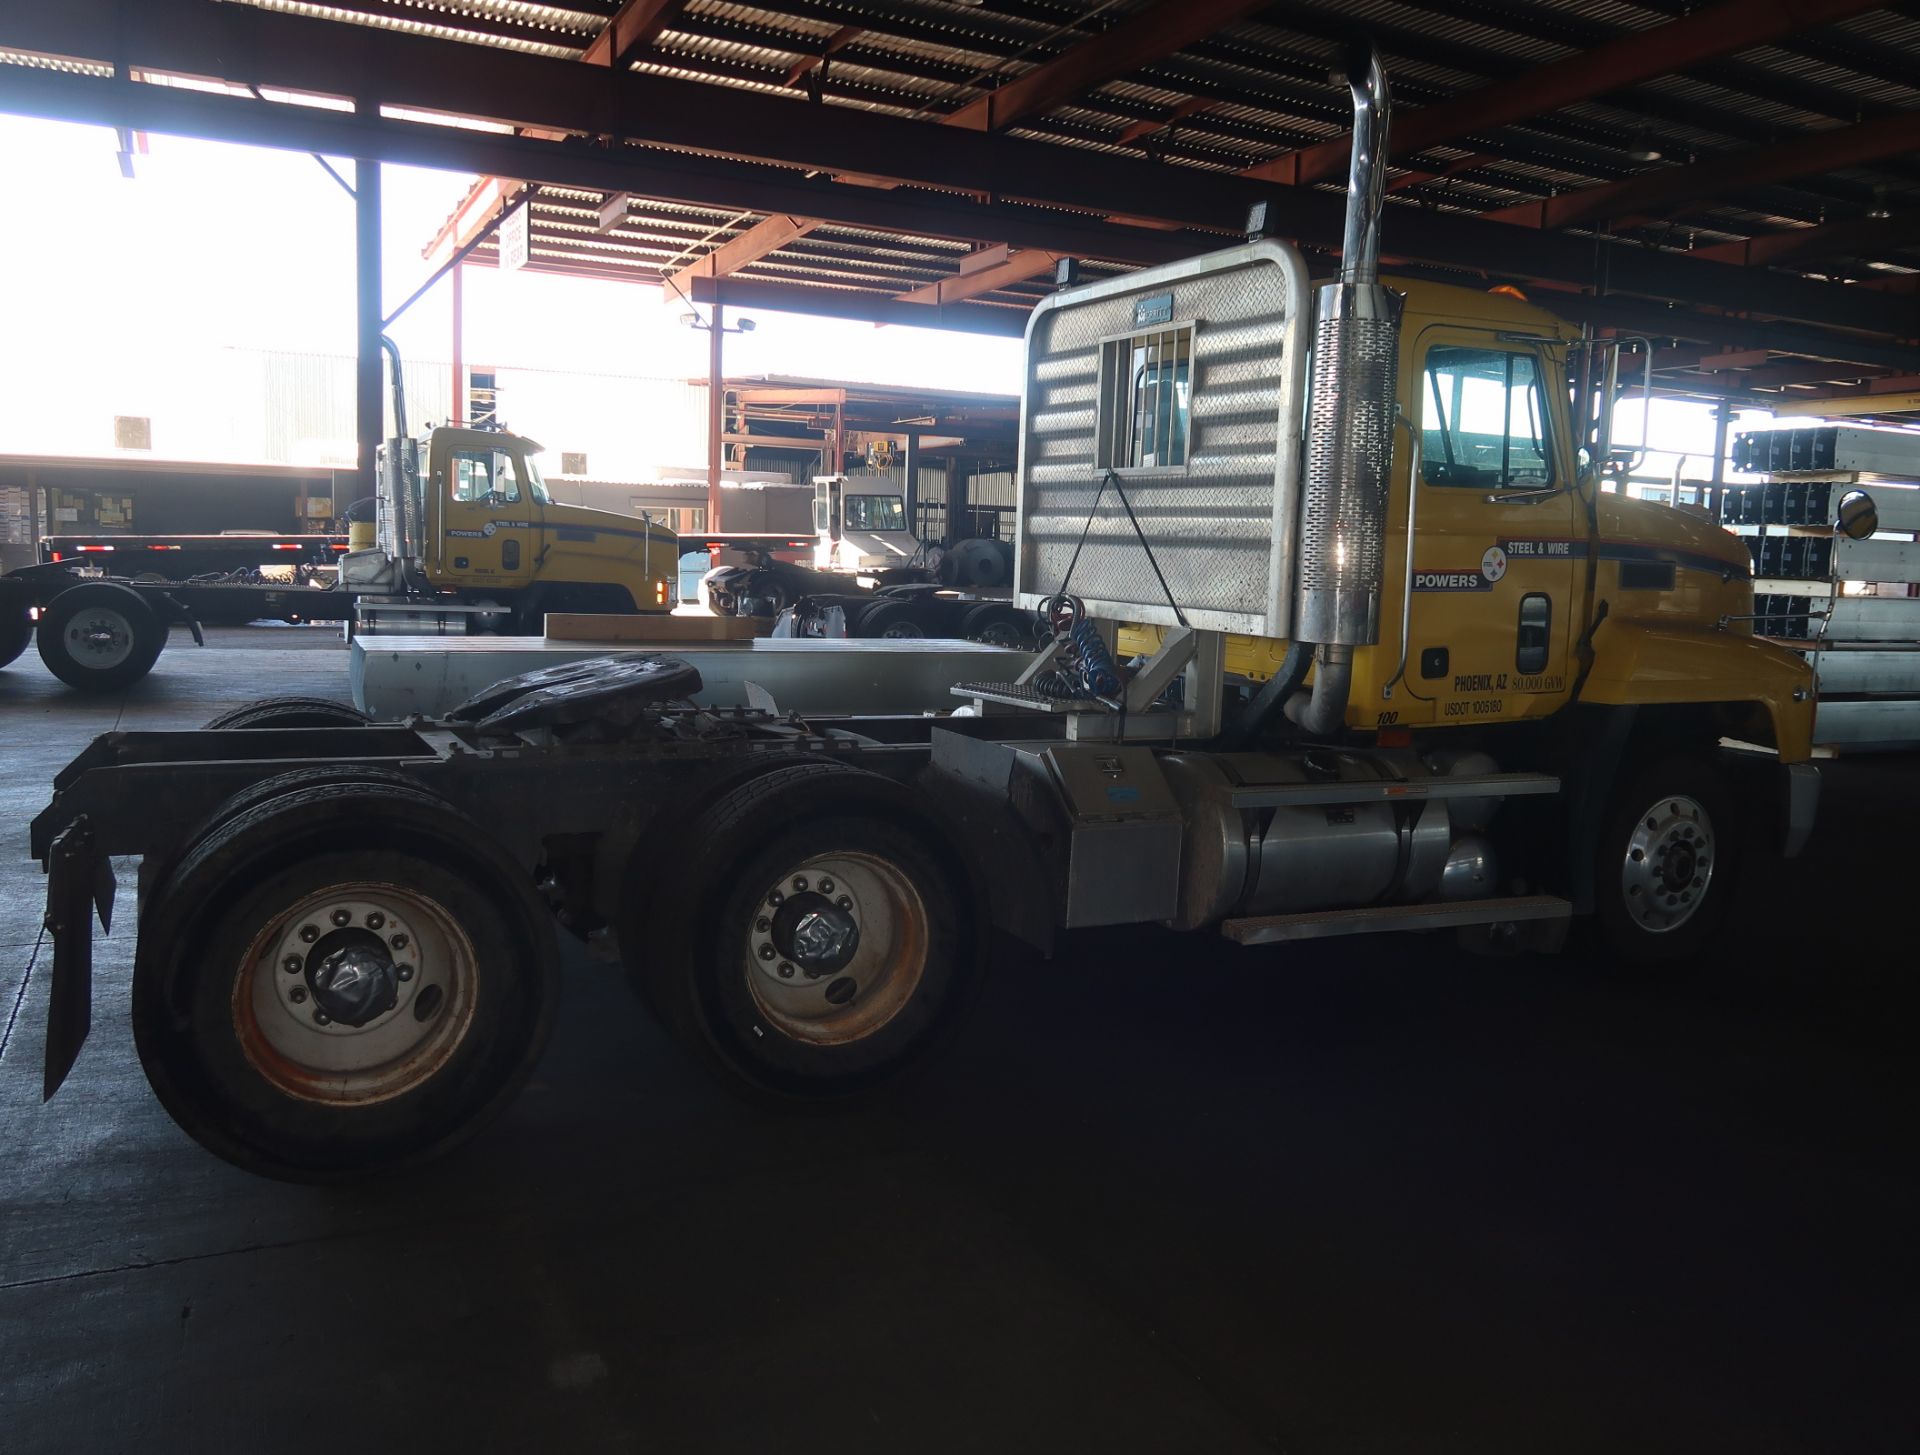 1994 MACK CH613 TANDEM AXLE TRUCK TRACTOR, VIN. 1M1AA12Y95W046680, ODOMETER SHOWS 42,167 REPLACED - Image 16 of 24